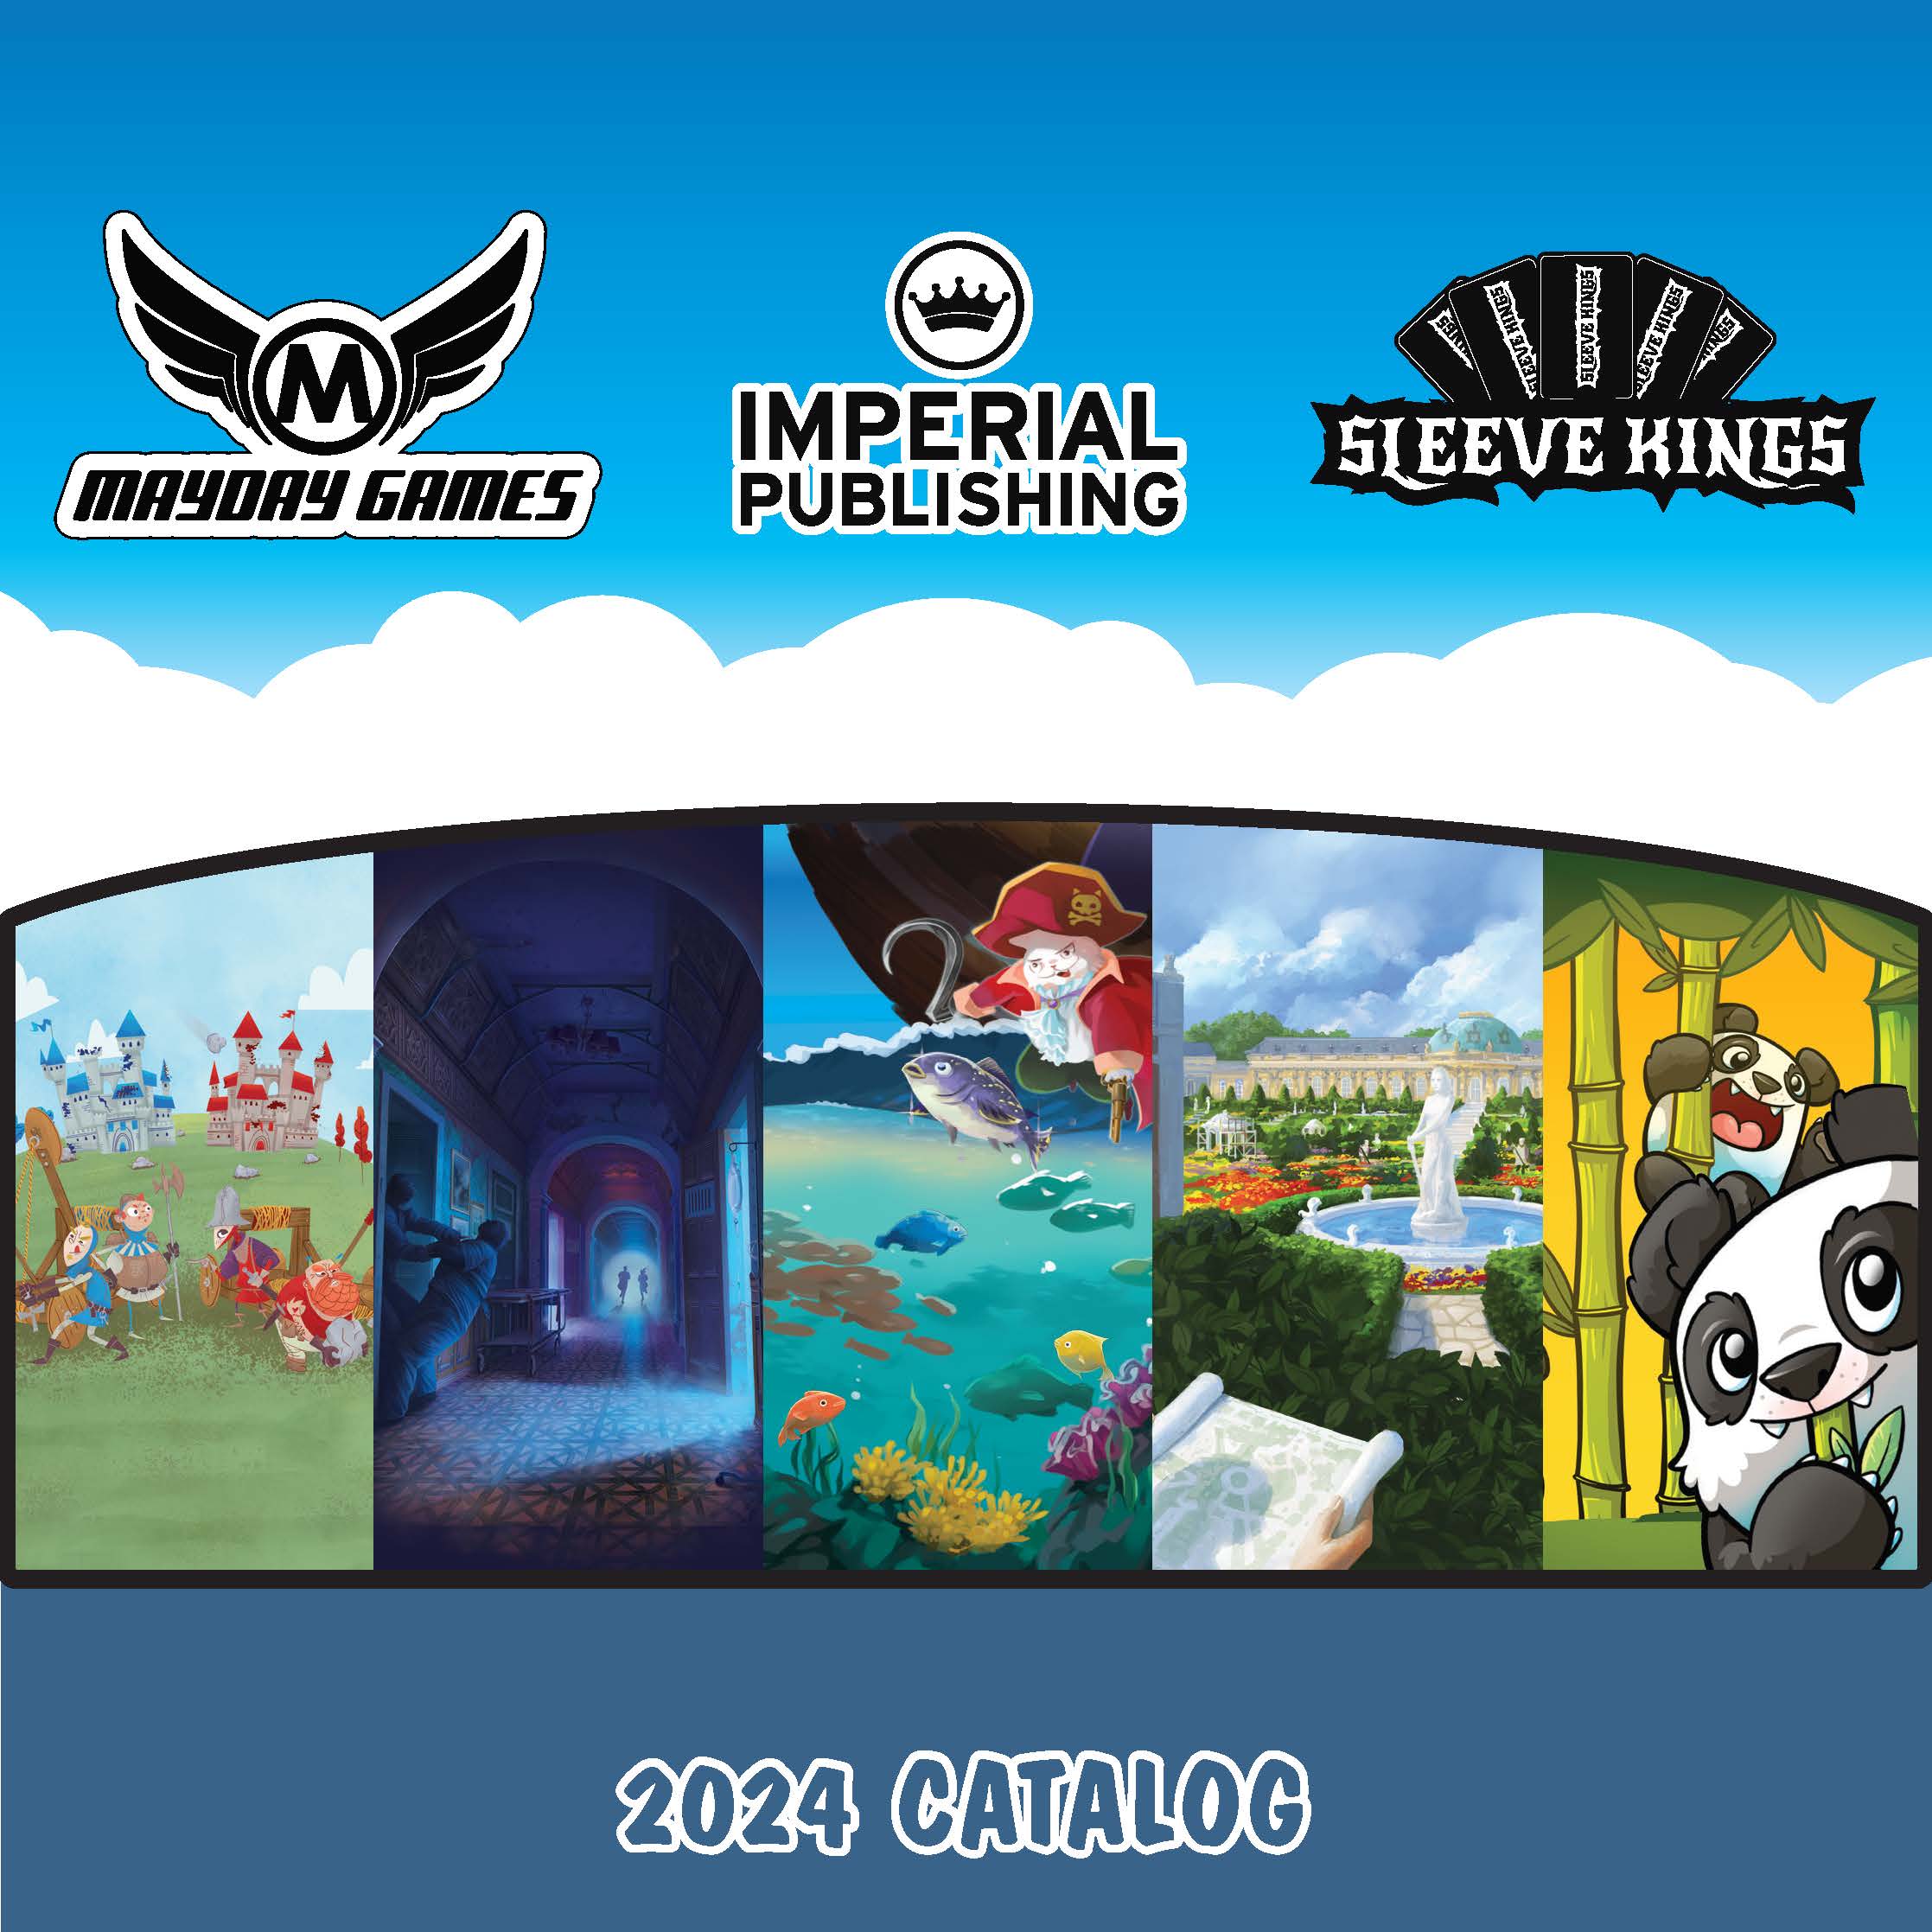 Mayday / Imperial Games 2024-25 Catalog